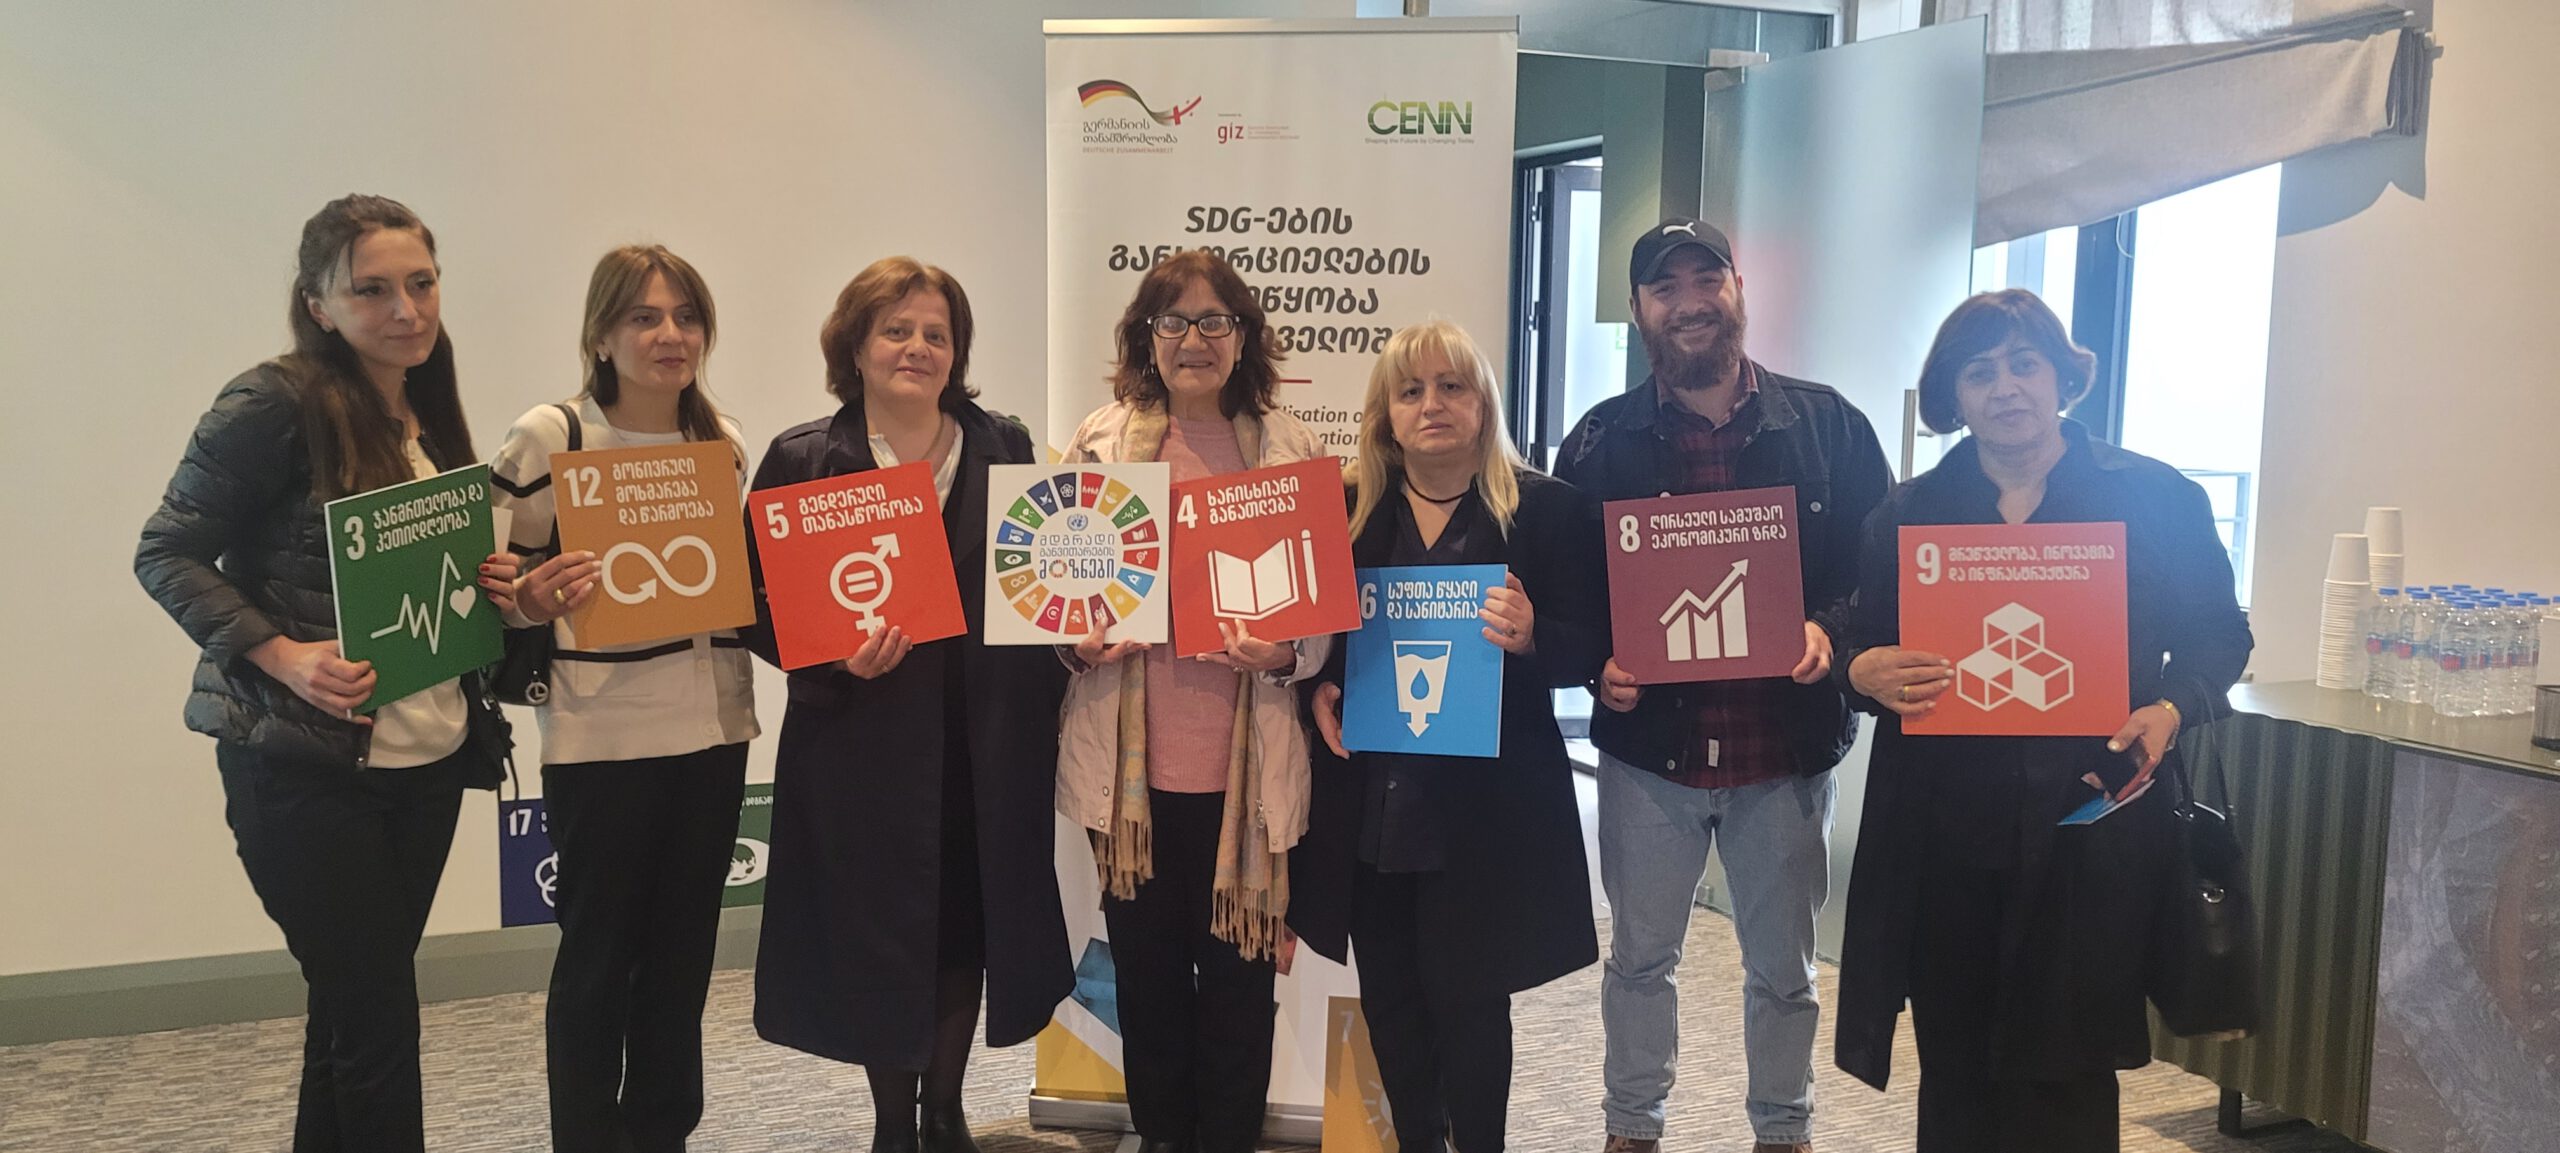 CENN & German Government continue strengthening CSO partnerships and collaboration for SDG implementation